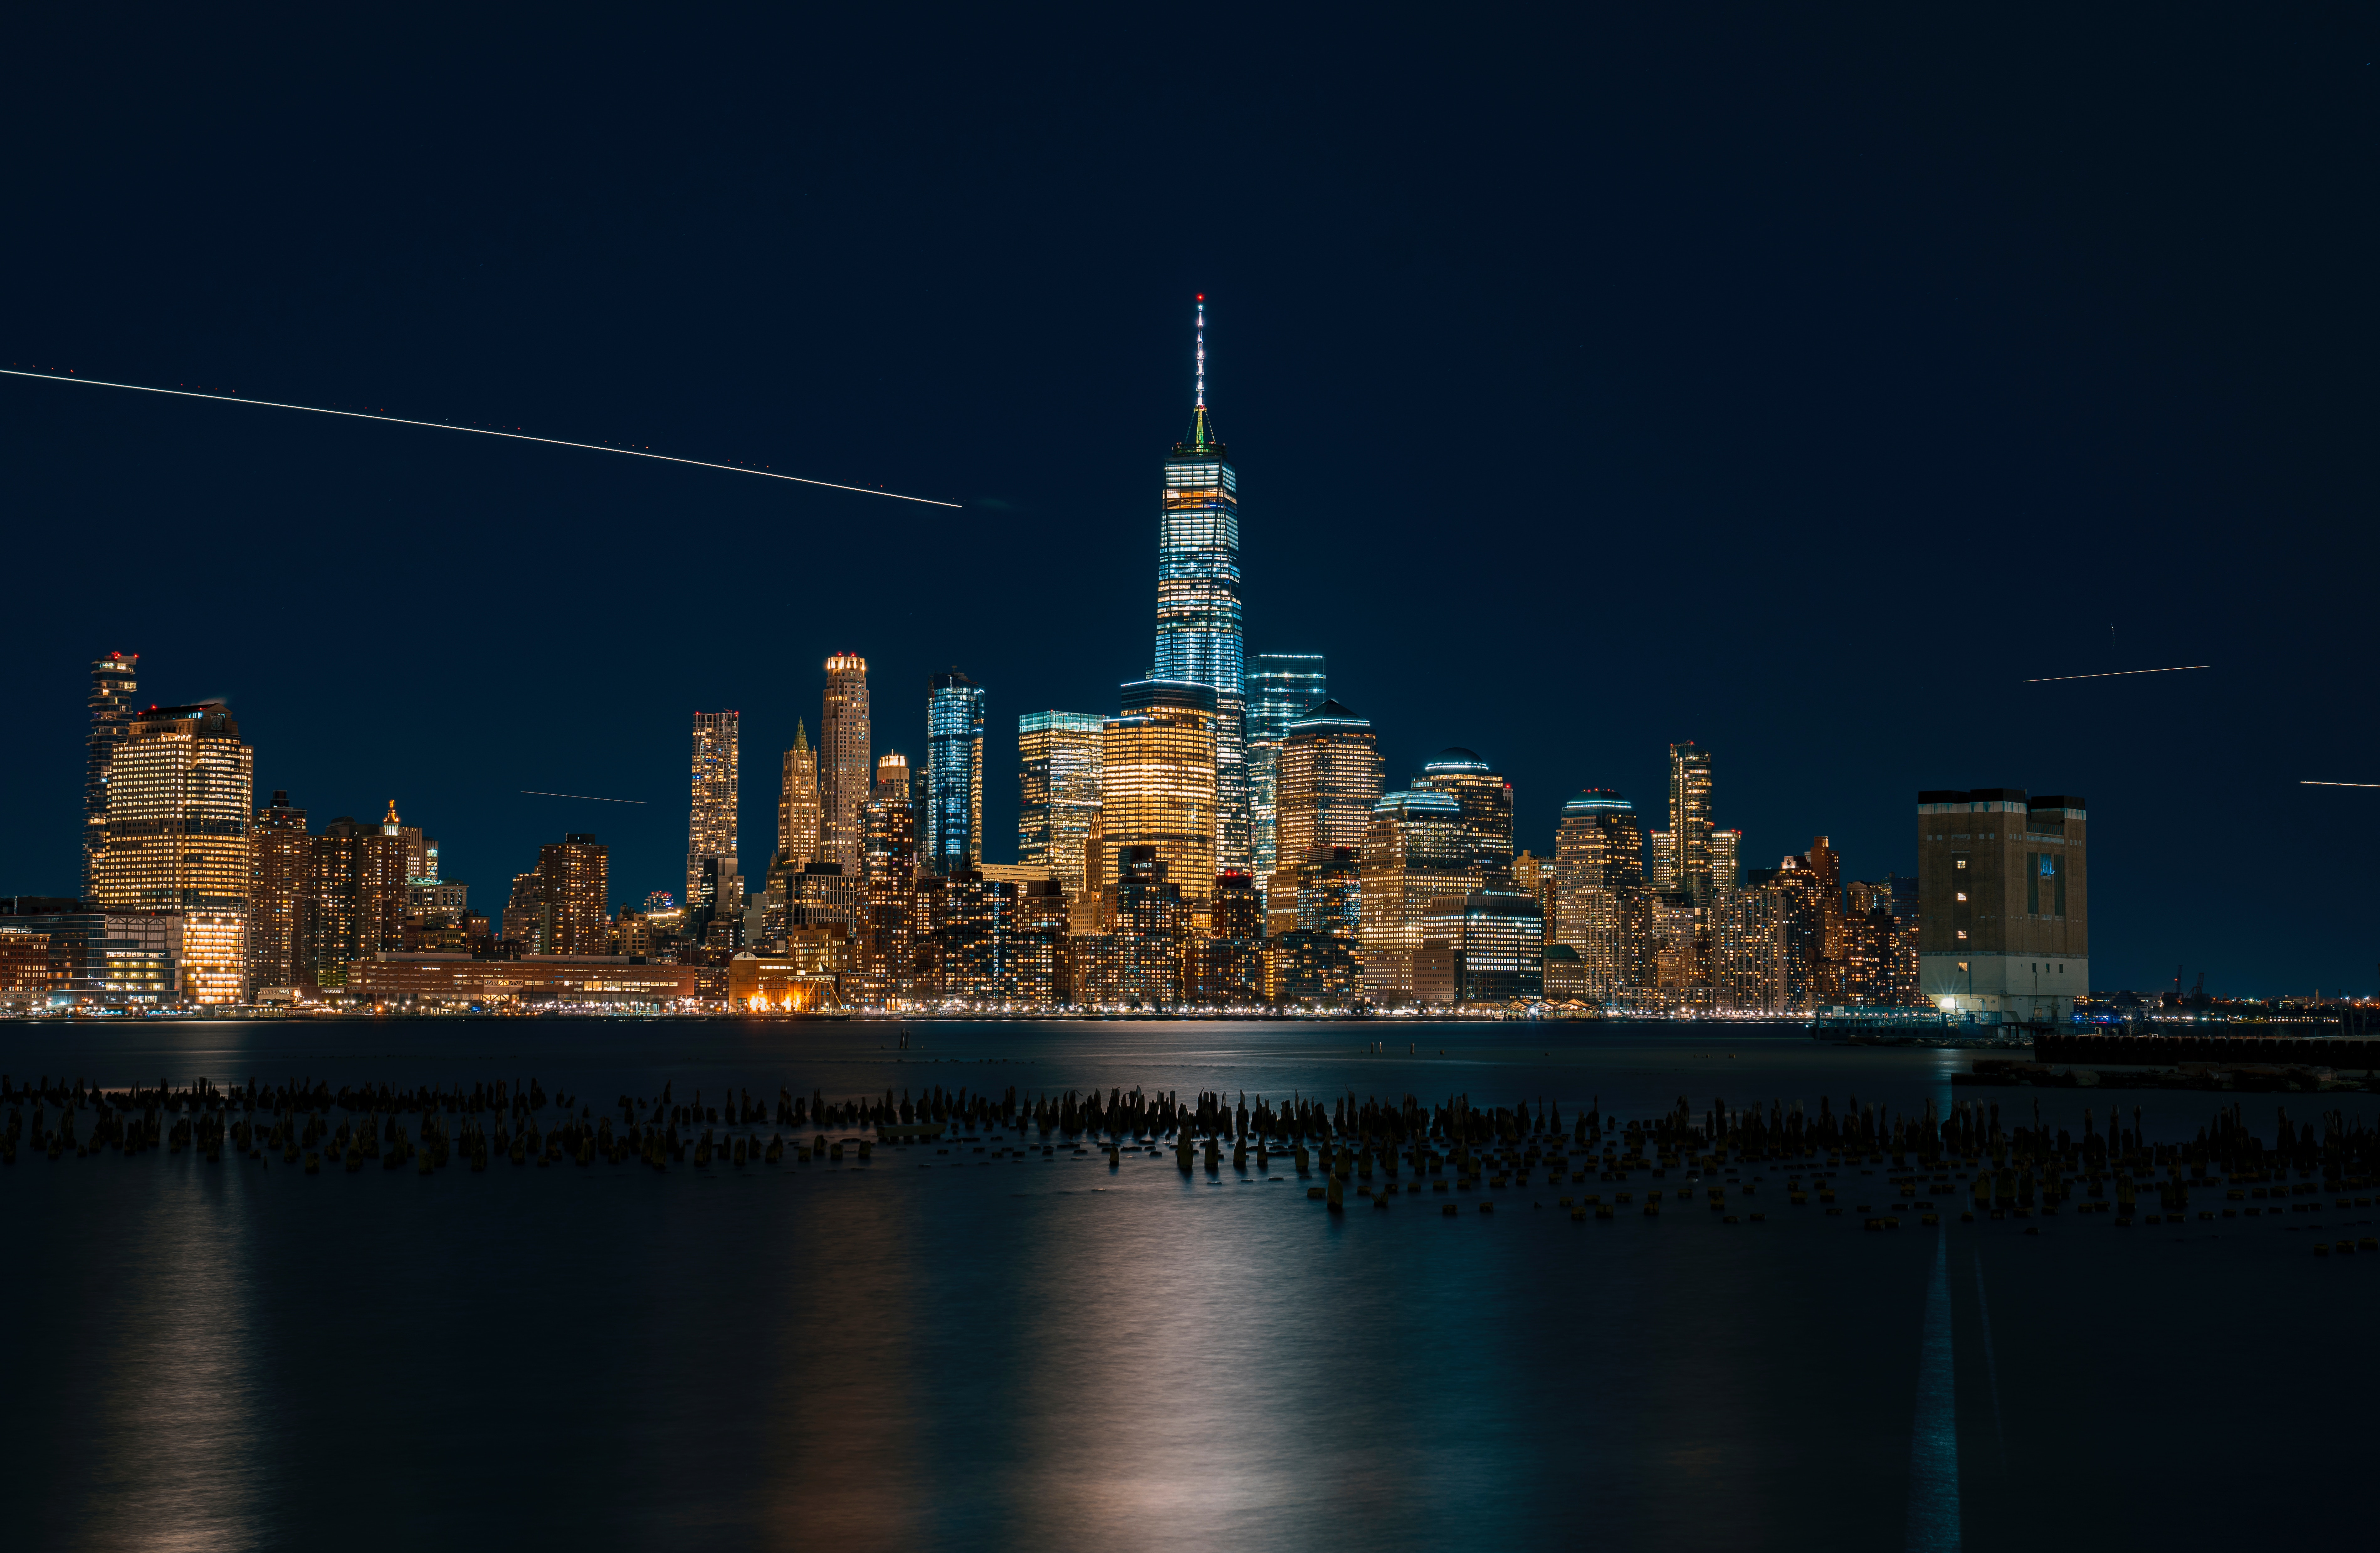 56616 download wallpaper cities, usa, shore, bank, night city, skyscrapers, united states, panorama, new york screensavers and pictures for free